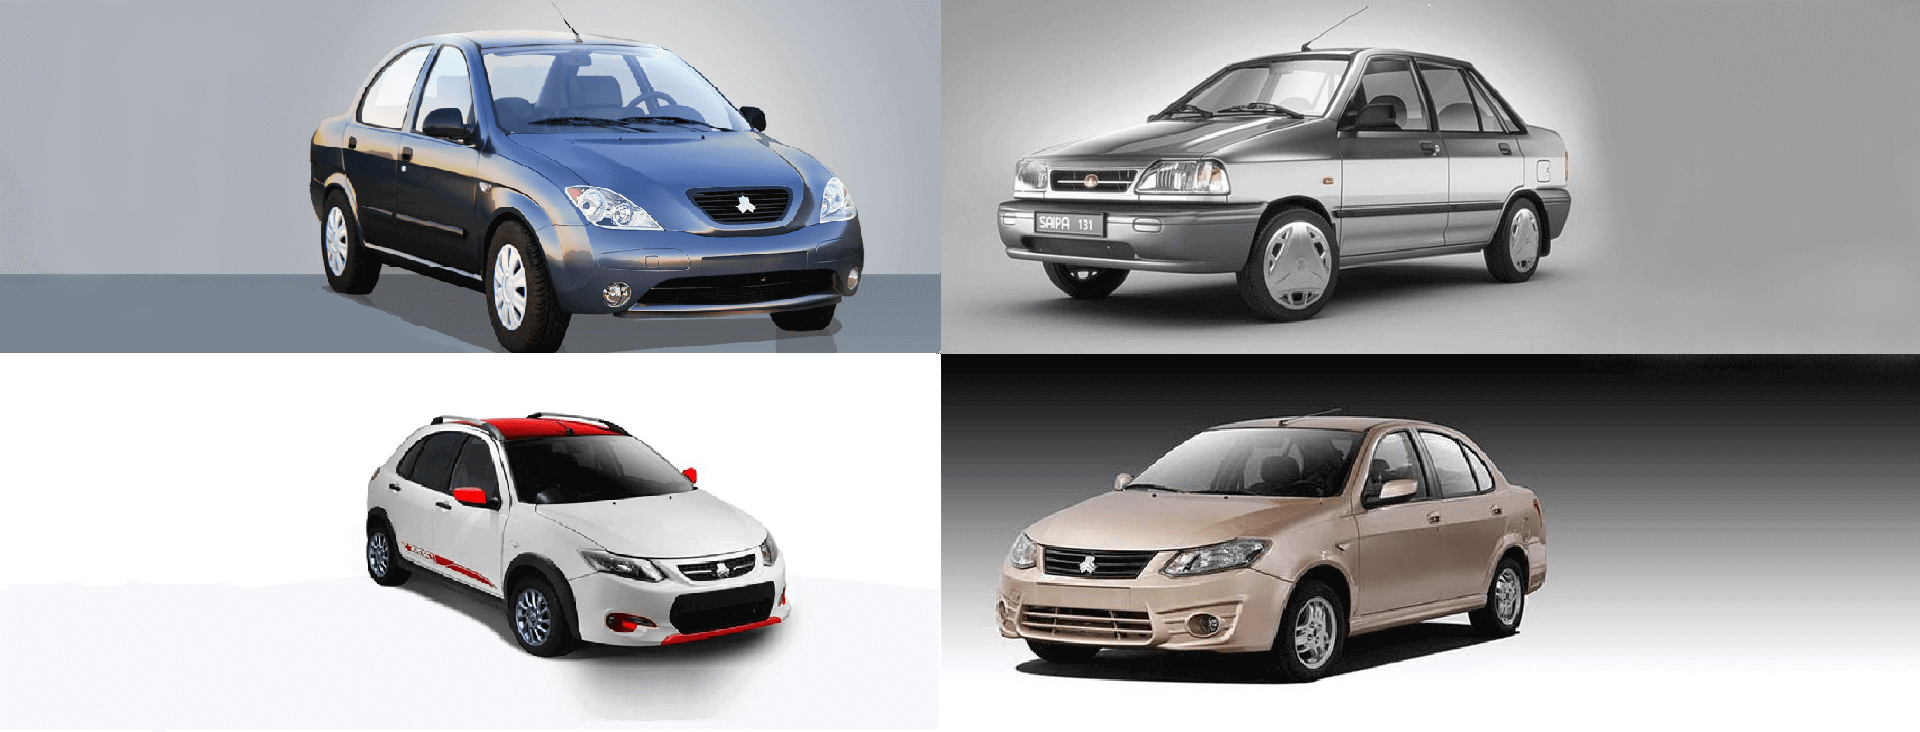 Types of electric and manual windshields for the front and rear of the car